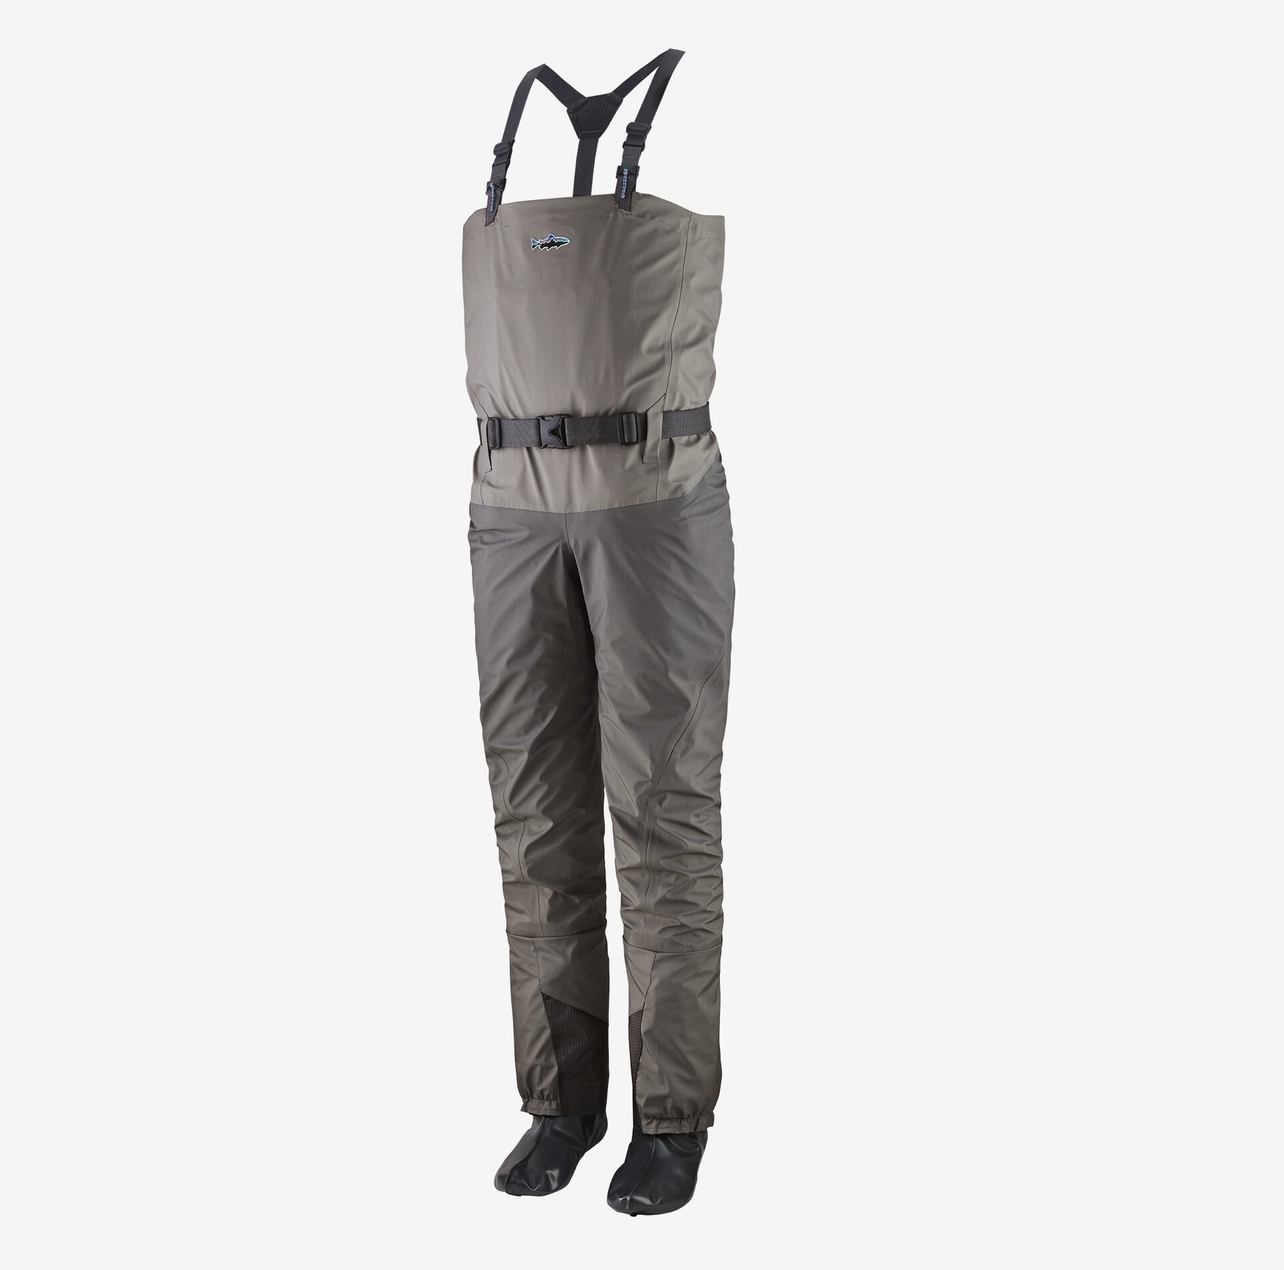 Patagonia M's Swiftcurrent Ultralight Wader - LSM